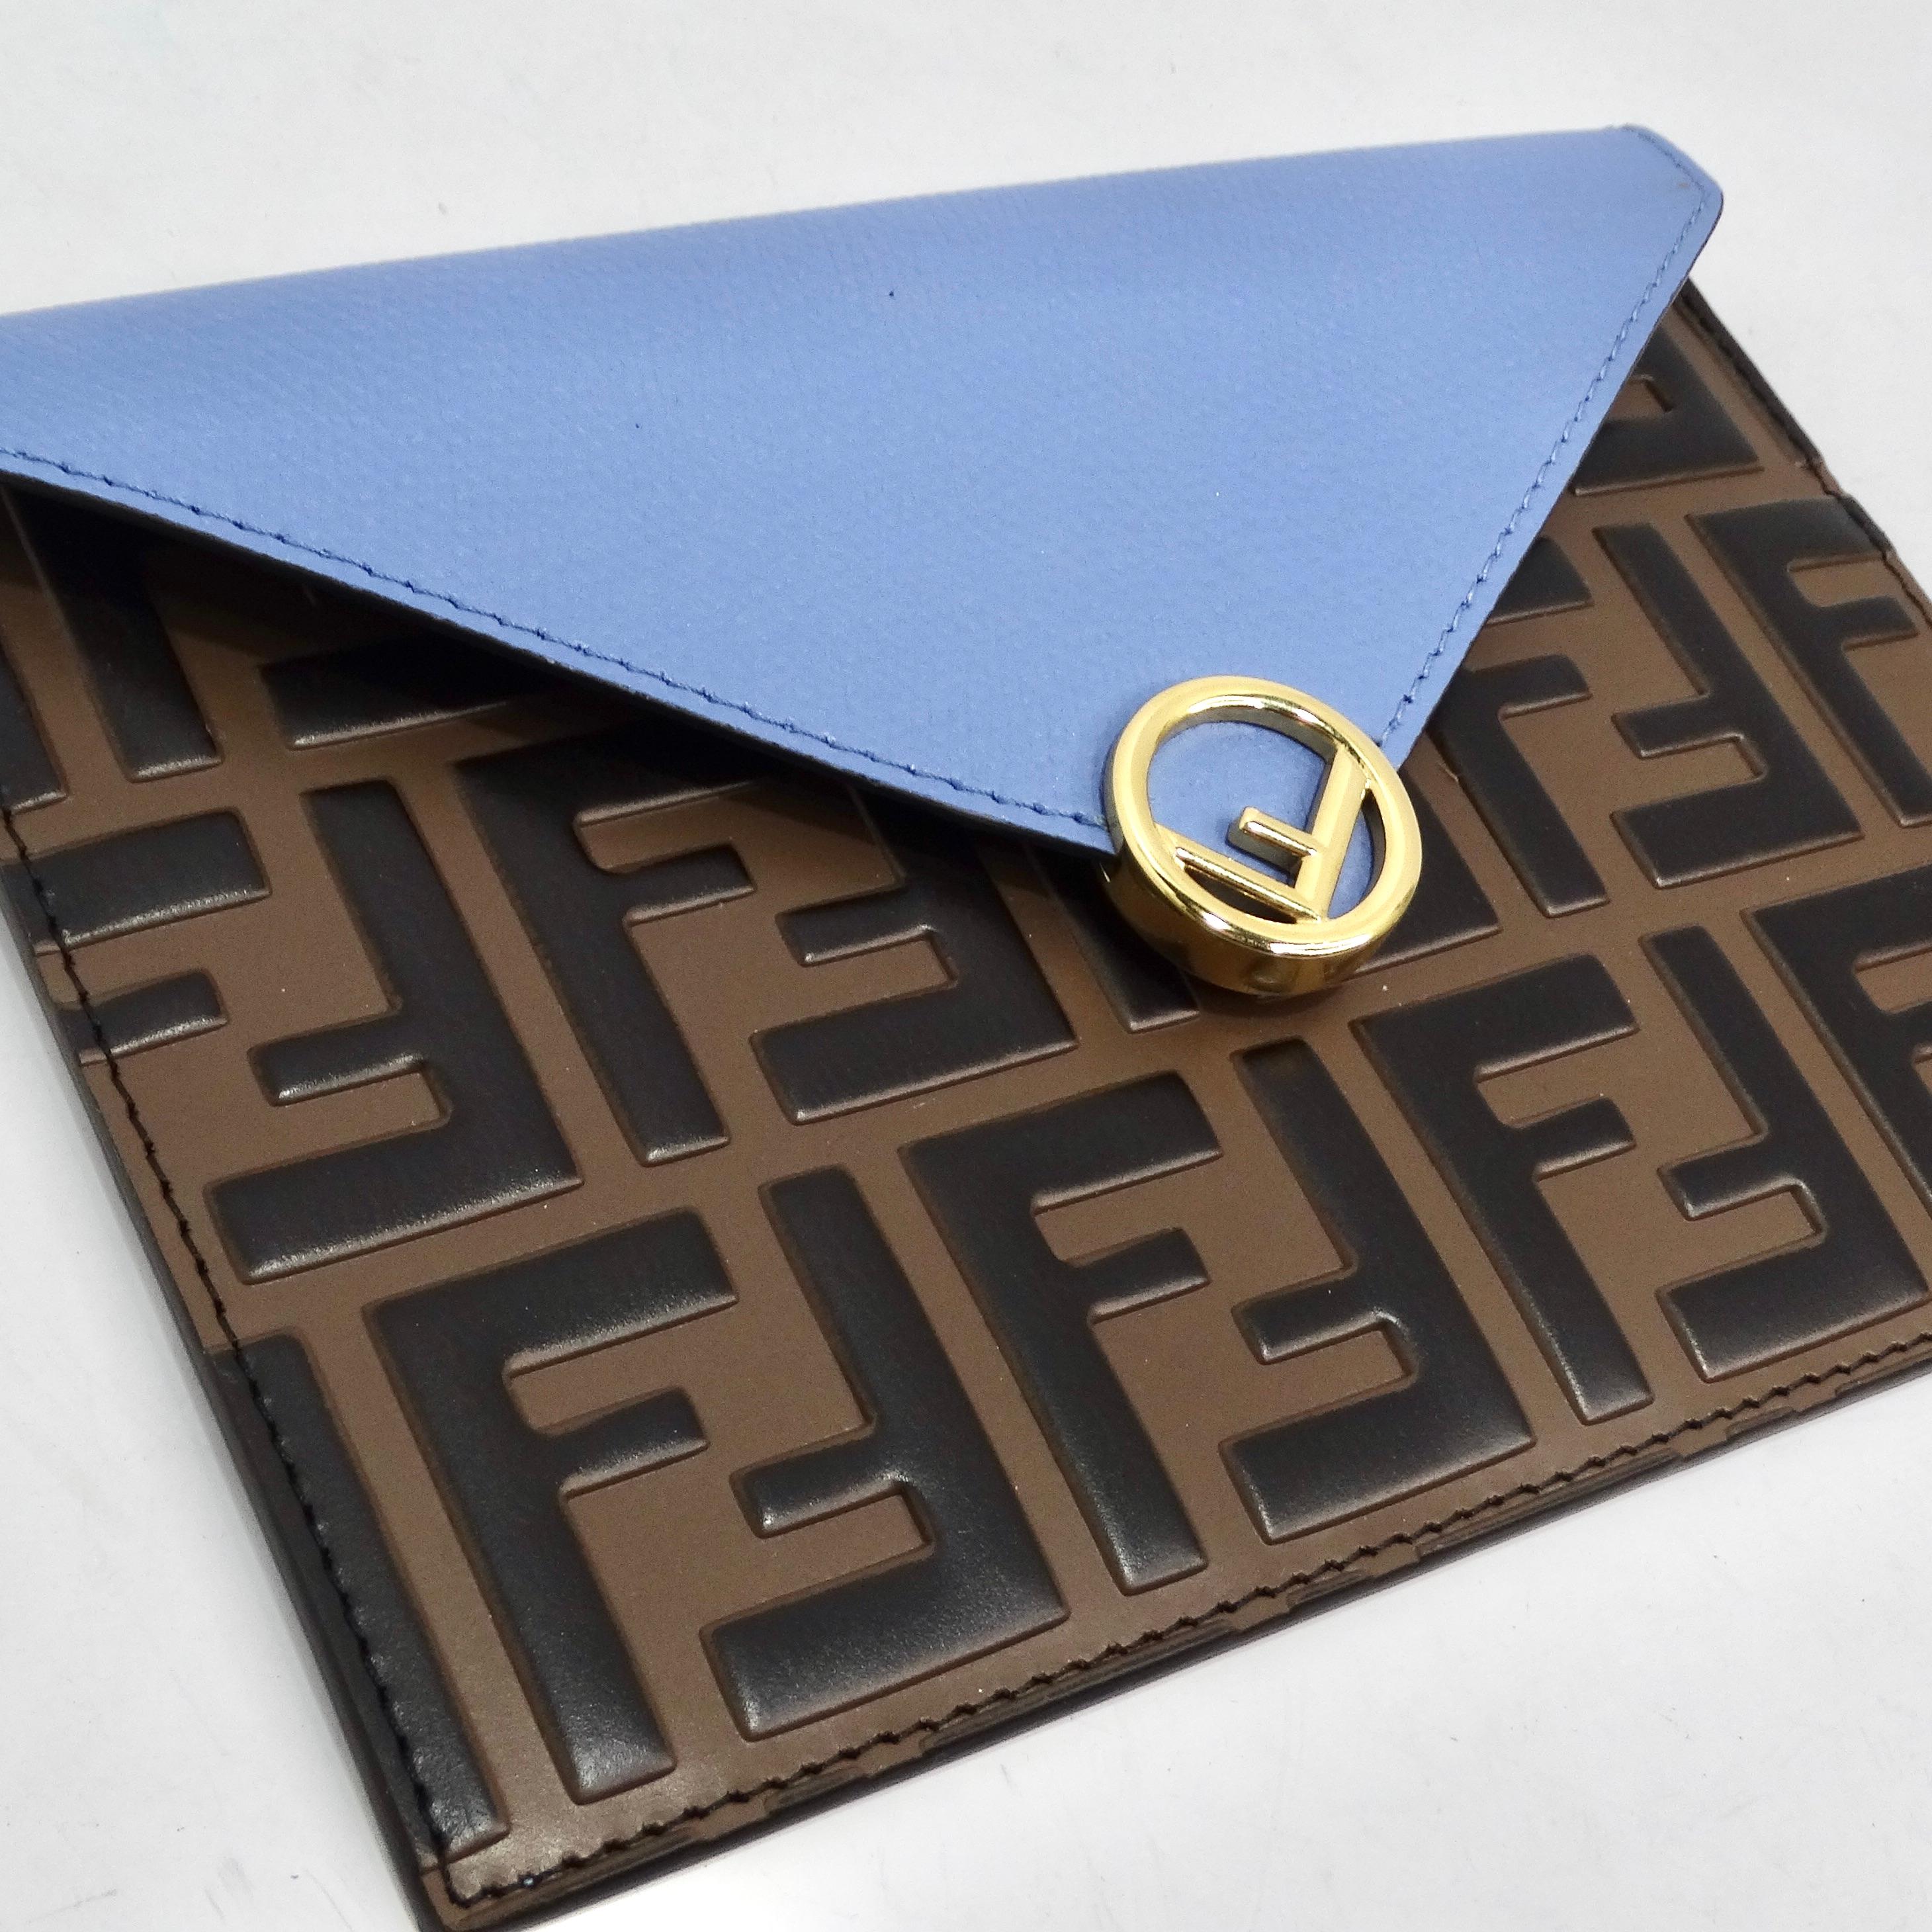 Fendi Vitello Cruise Bi-Color Embossed Flat Envelope Pouch In Excellent Condition For Sale In Scottsdale, AZ